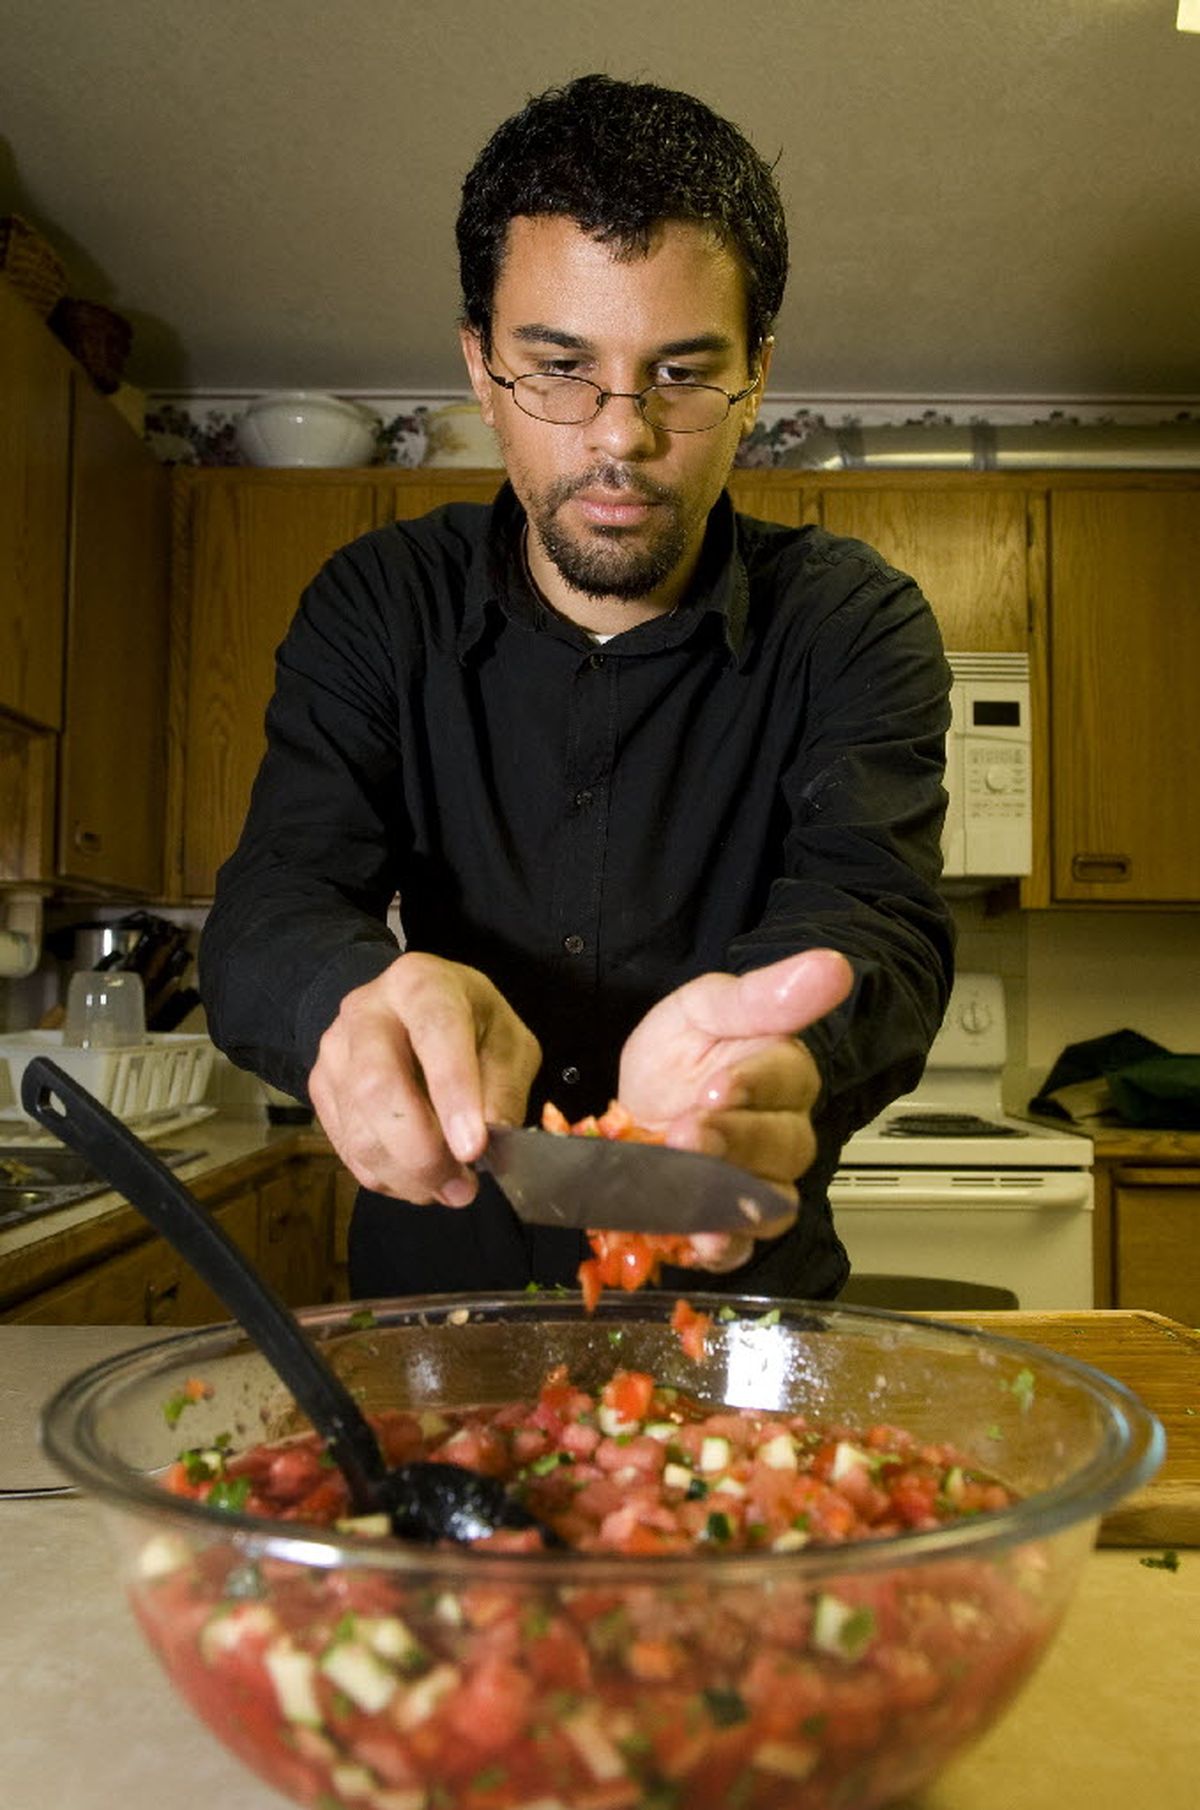 Vegetarian chef Joseph Nally is a graduate of the College of Culinary Arts at Johnson and Wales University and worked as a chef for many years before he slowly turned to a plant-based diet. He didn